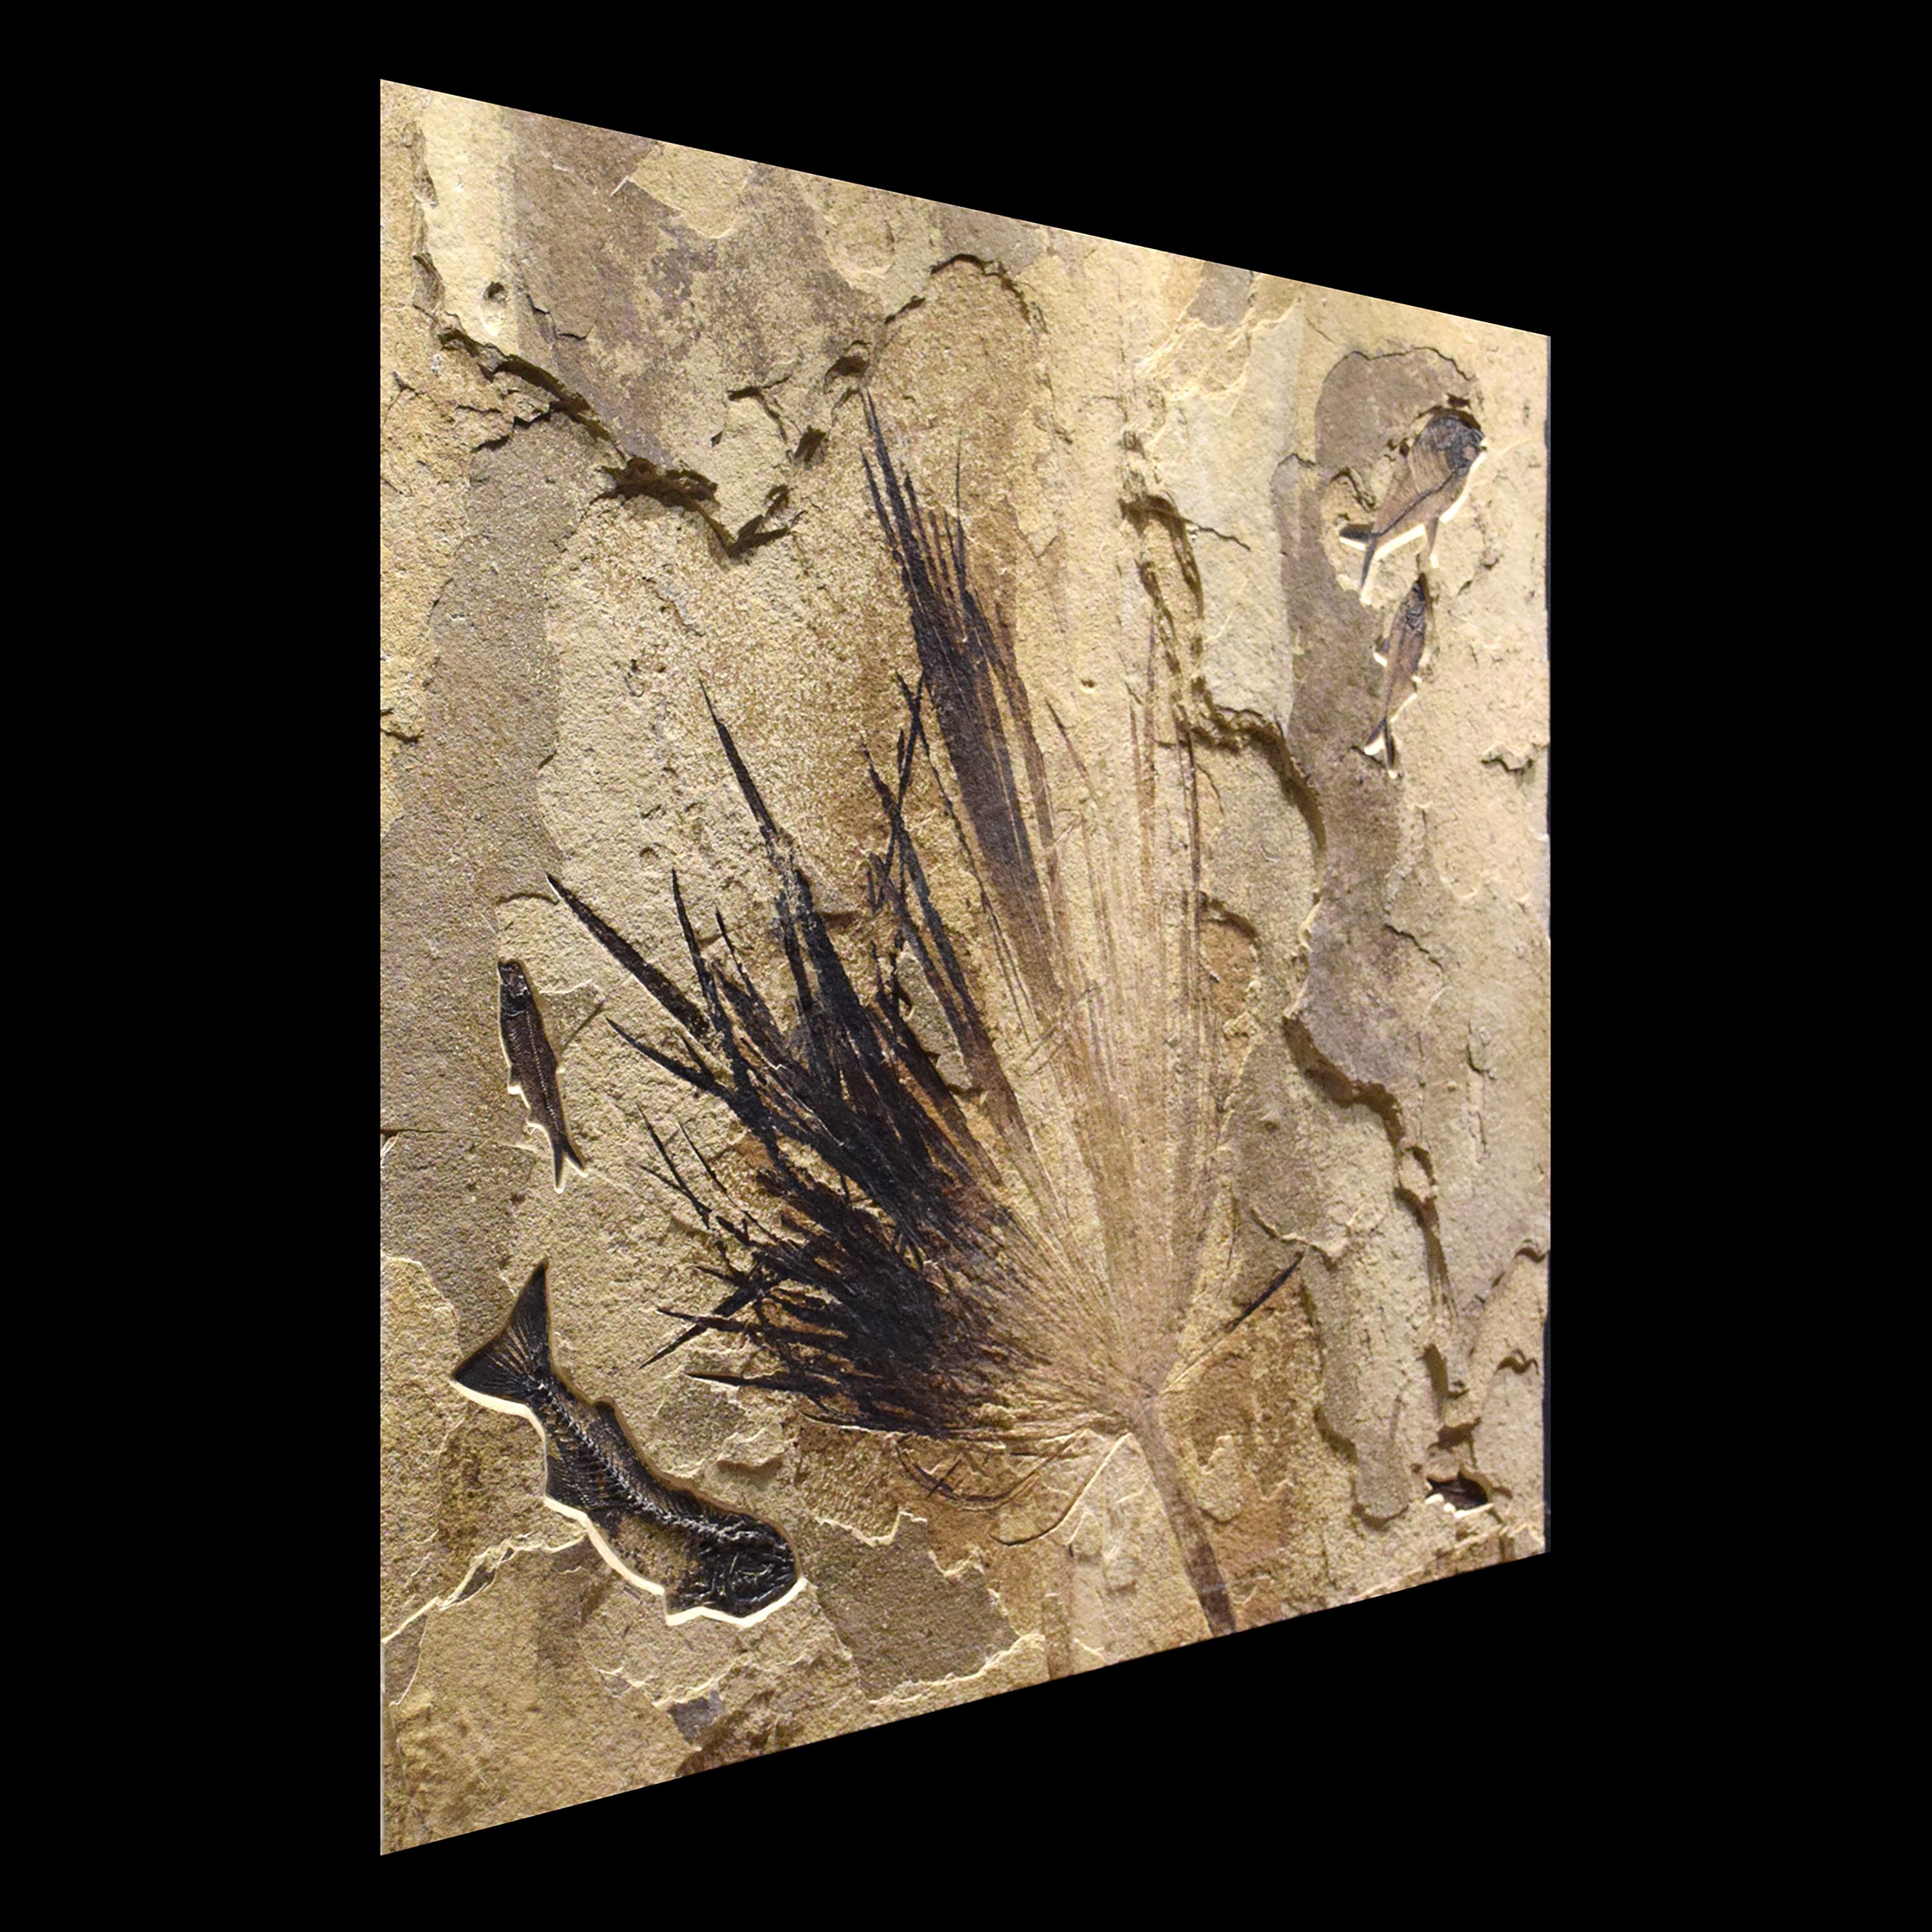 50 Million Year Old Eocene Era Fossil Palm Frond in Stone, from Wyoming 1